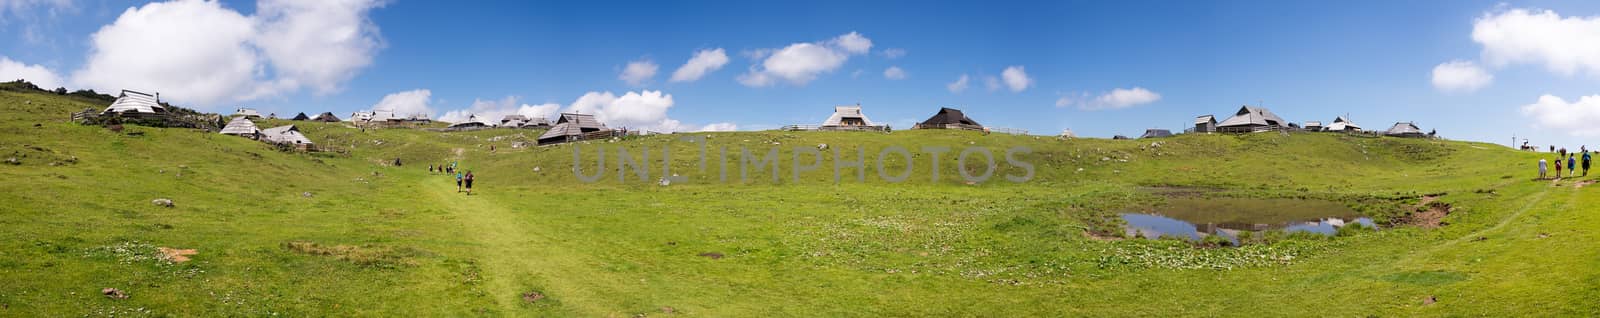 Extreme large panorama of Velika planina plateau, Slovenia, Mountain village in Alps, wooden houses in traditional style, popular hiking destination